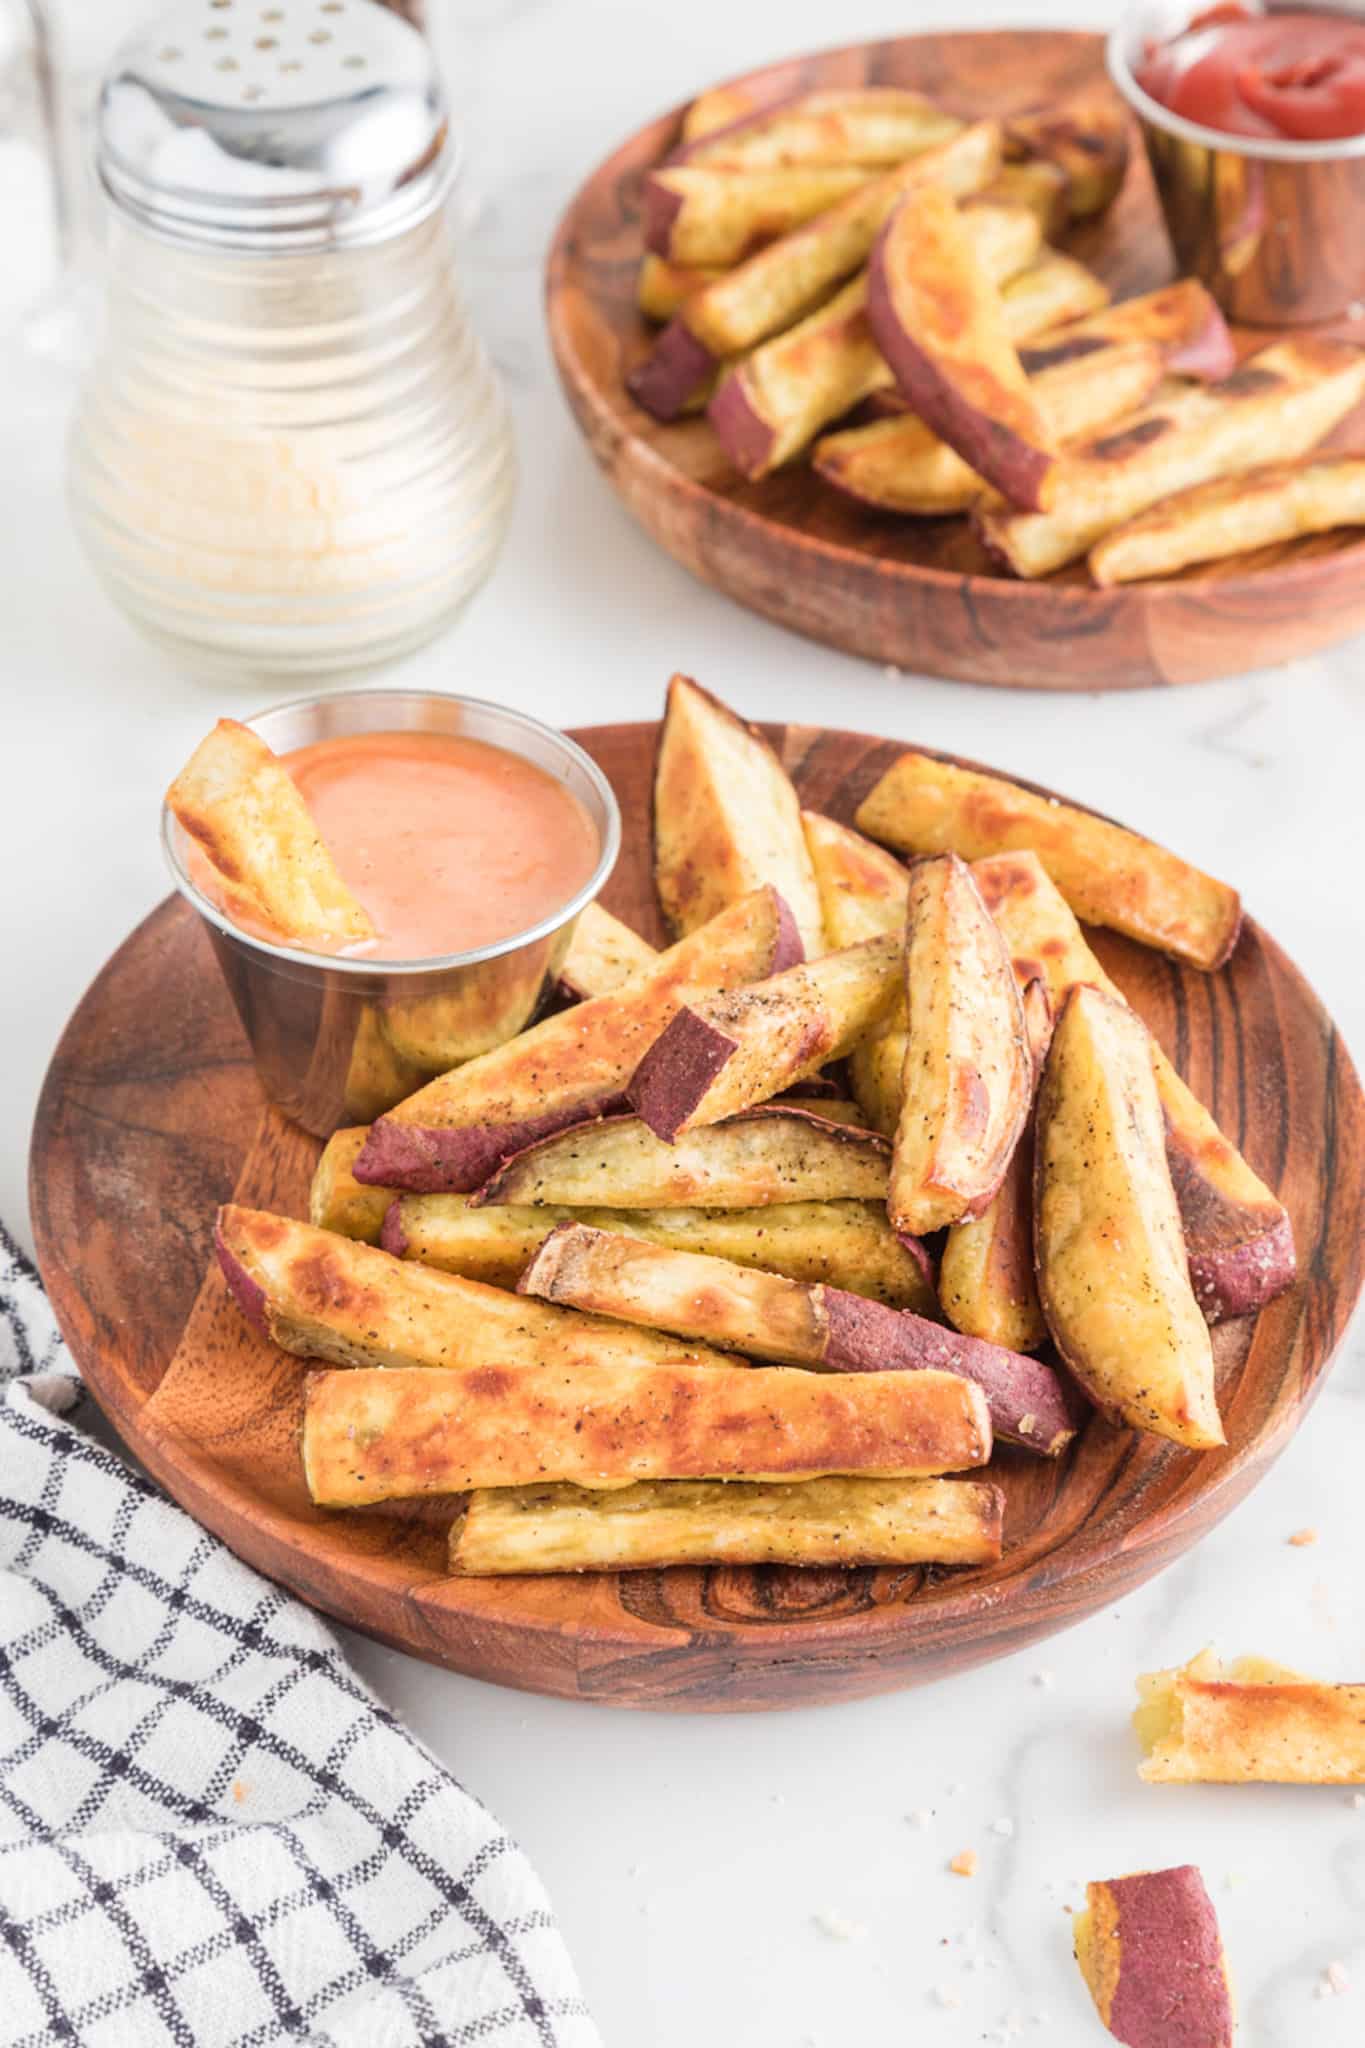 https://www.cleaneatingkitchen.com/wp-content/uploads/2022/03/Japanese-Sweet-Potato-Fries-33-scaled.jpg